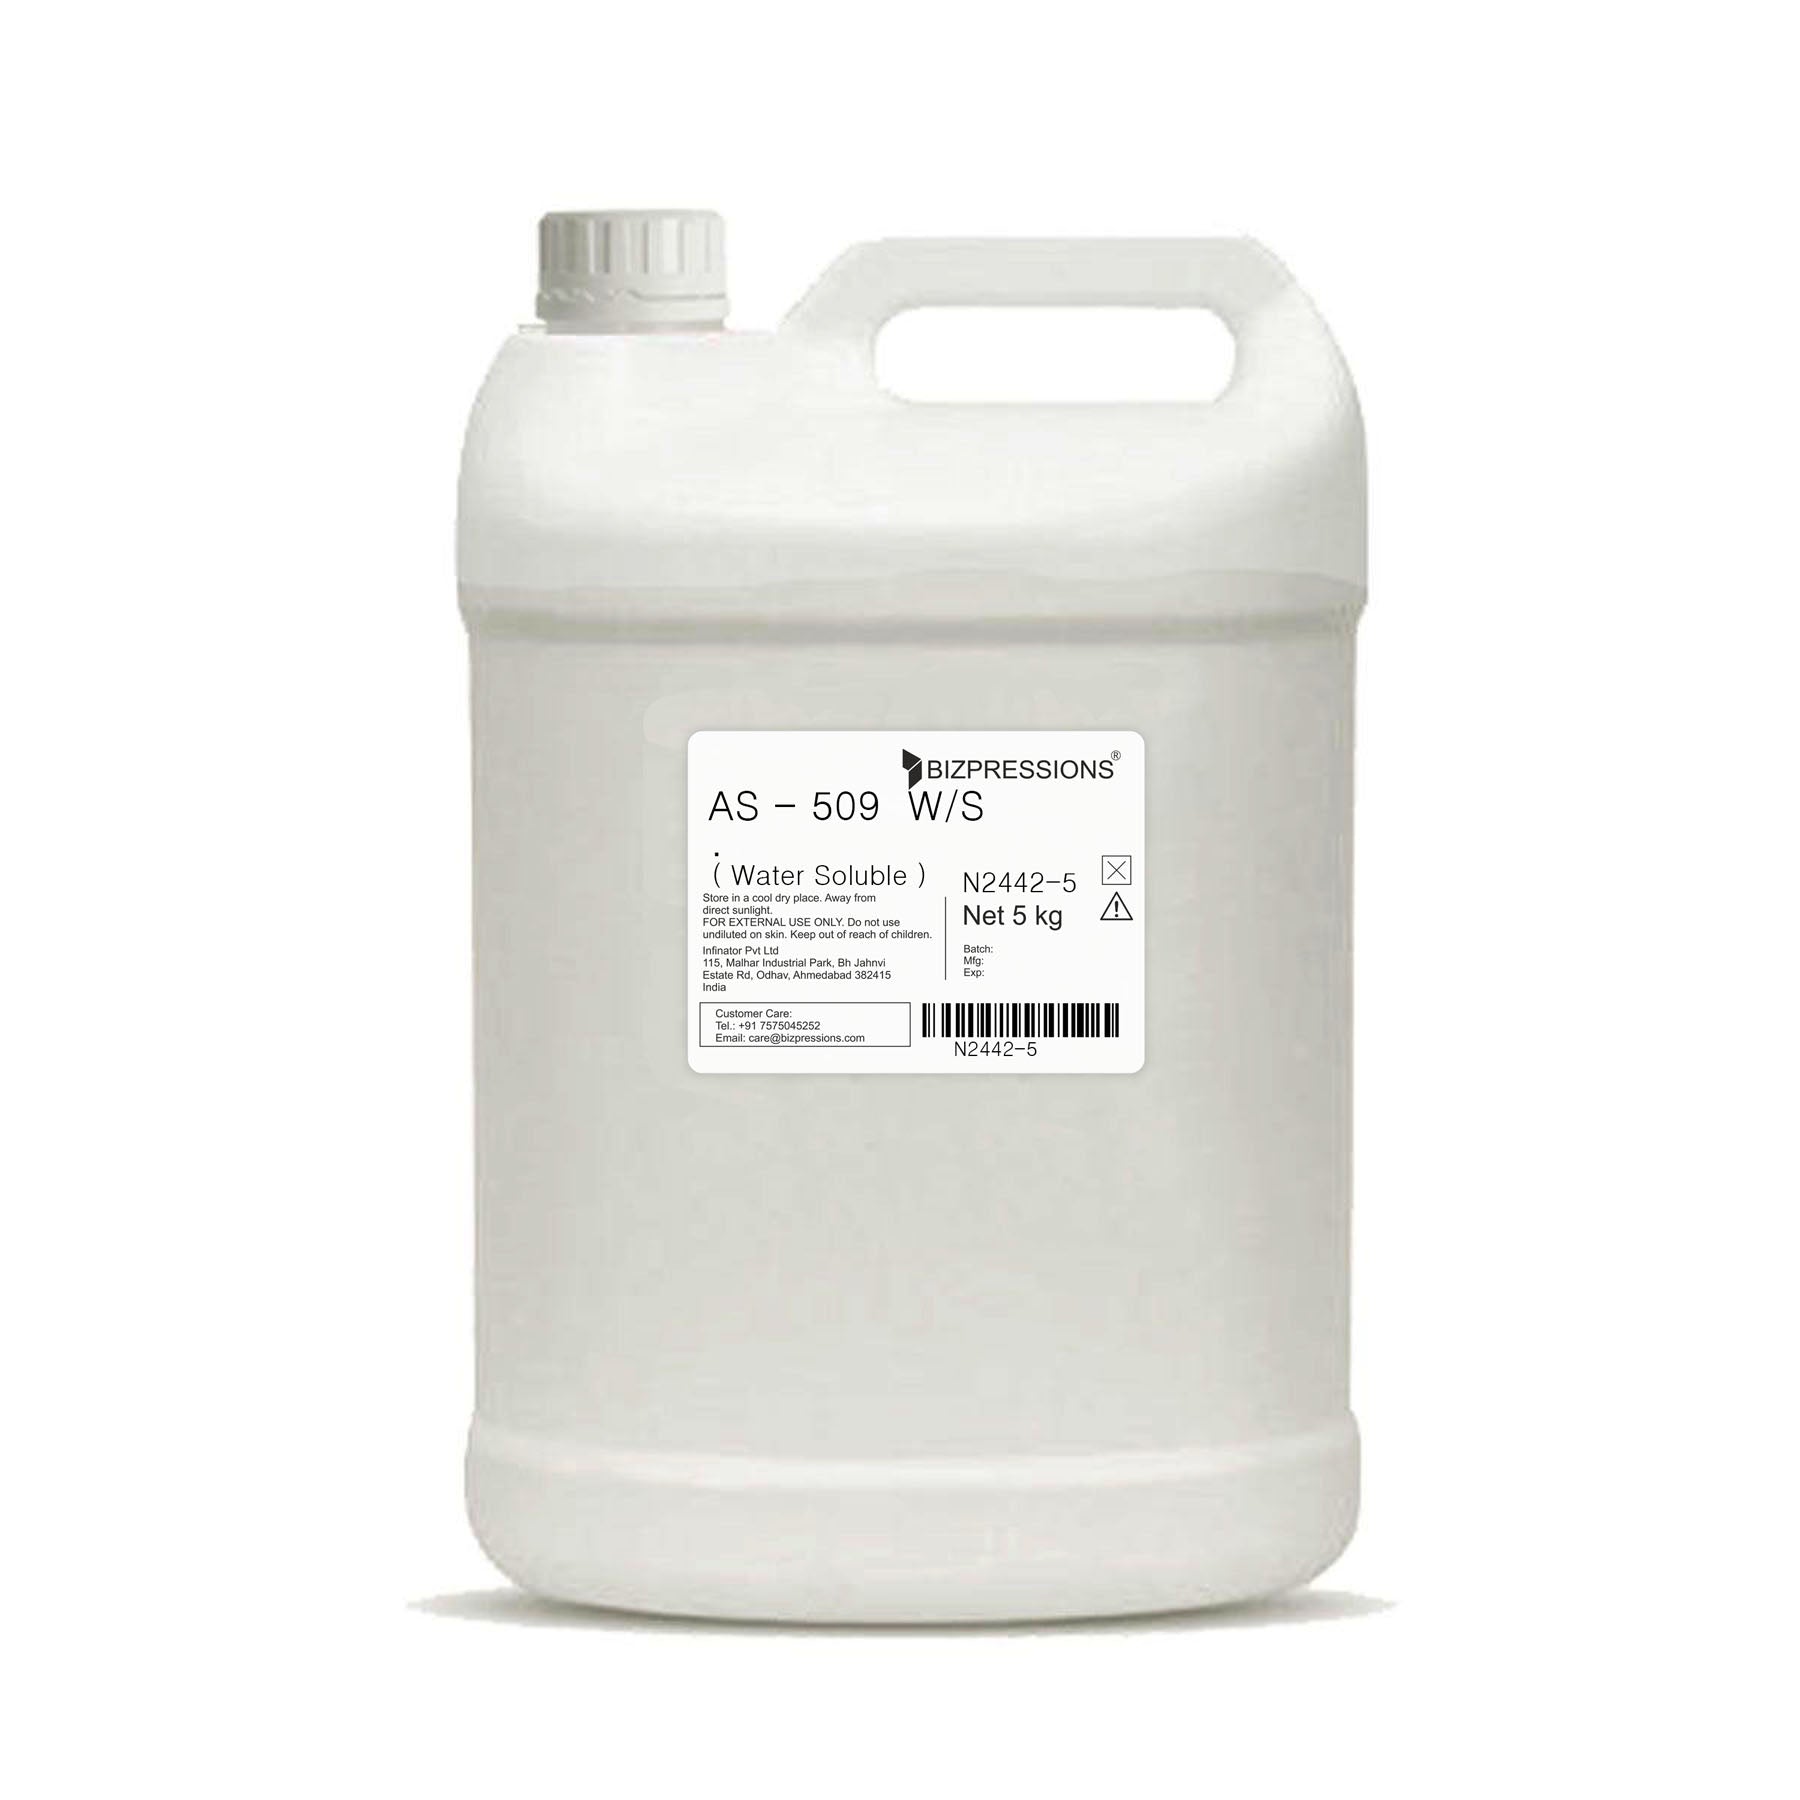 AS - 509 W/S - Fragrance ( Water Soluble ) - 5 kg